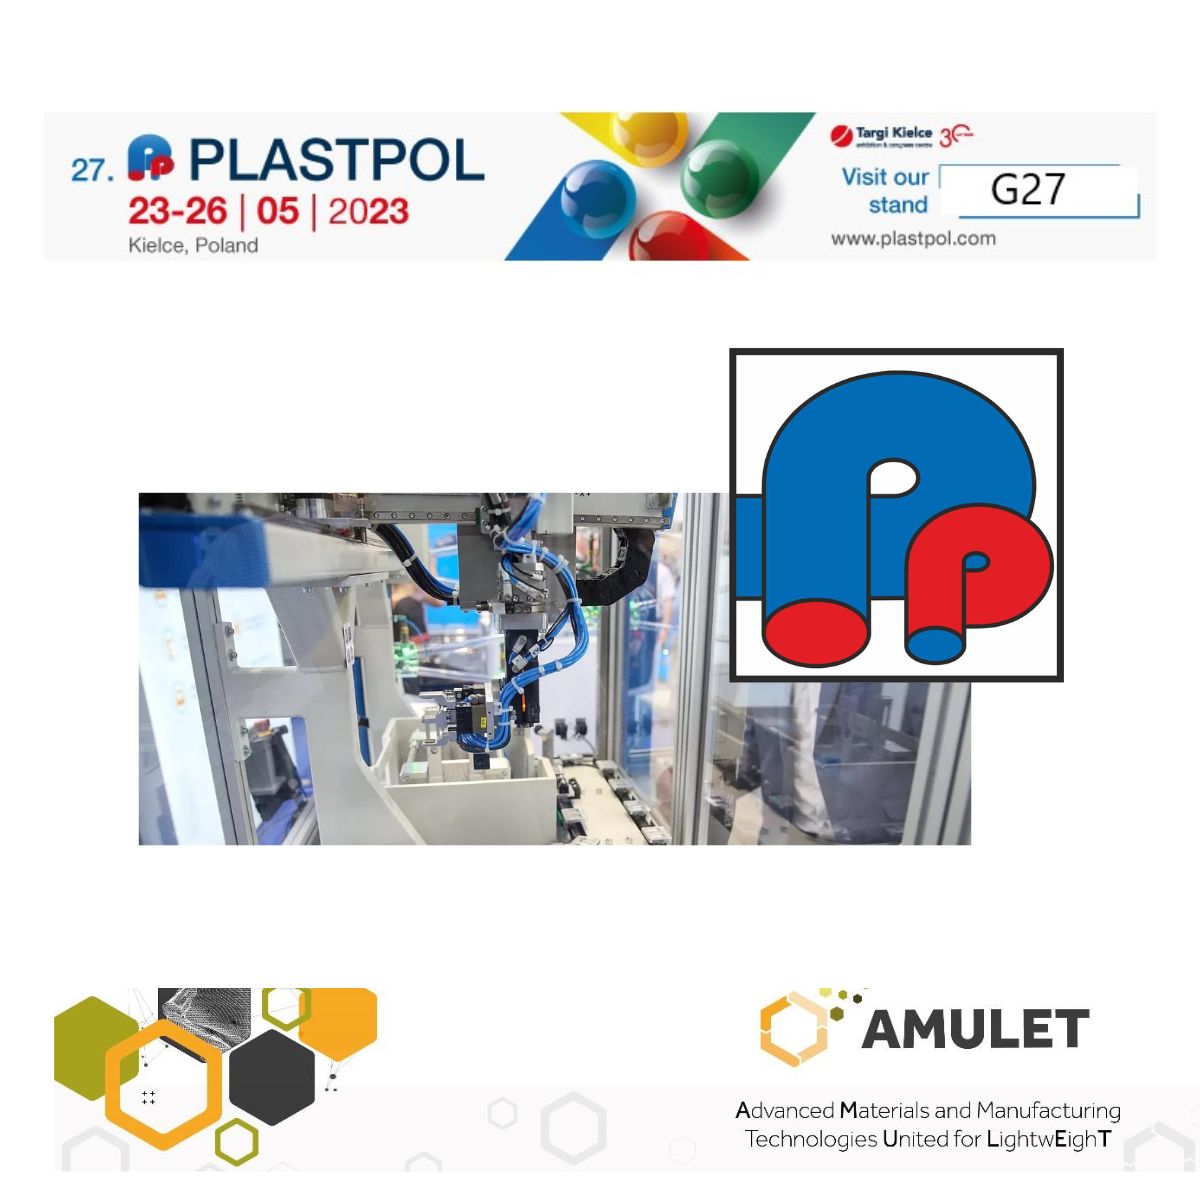 📢 Meet with Amulet during the PLASTPOL in Kielce!

The expo is the focal point for the latest technological advancements and the most exciting market offers.

📆 23-26 May 2023 at 🌐 Kielce

More information can be found 👉 amulet-h2020.eu/plastpol-23-26…

#H2020 #INNOSUP #EISMEA #ECCP